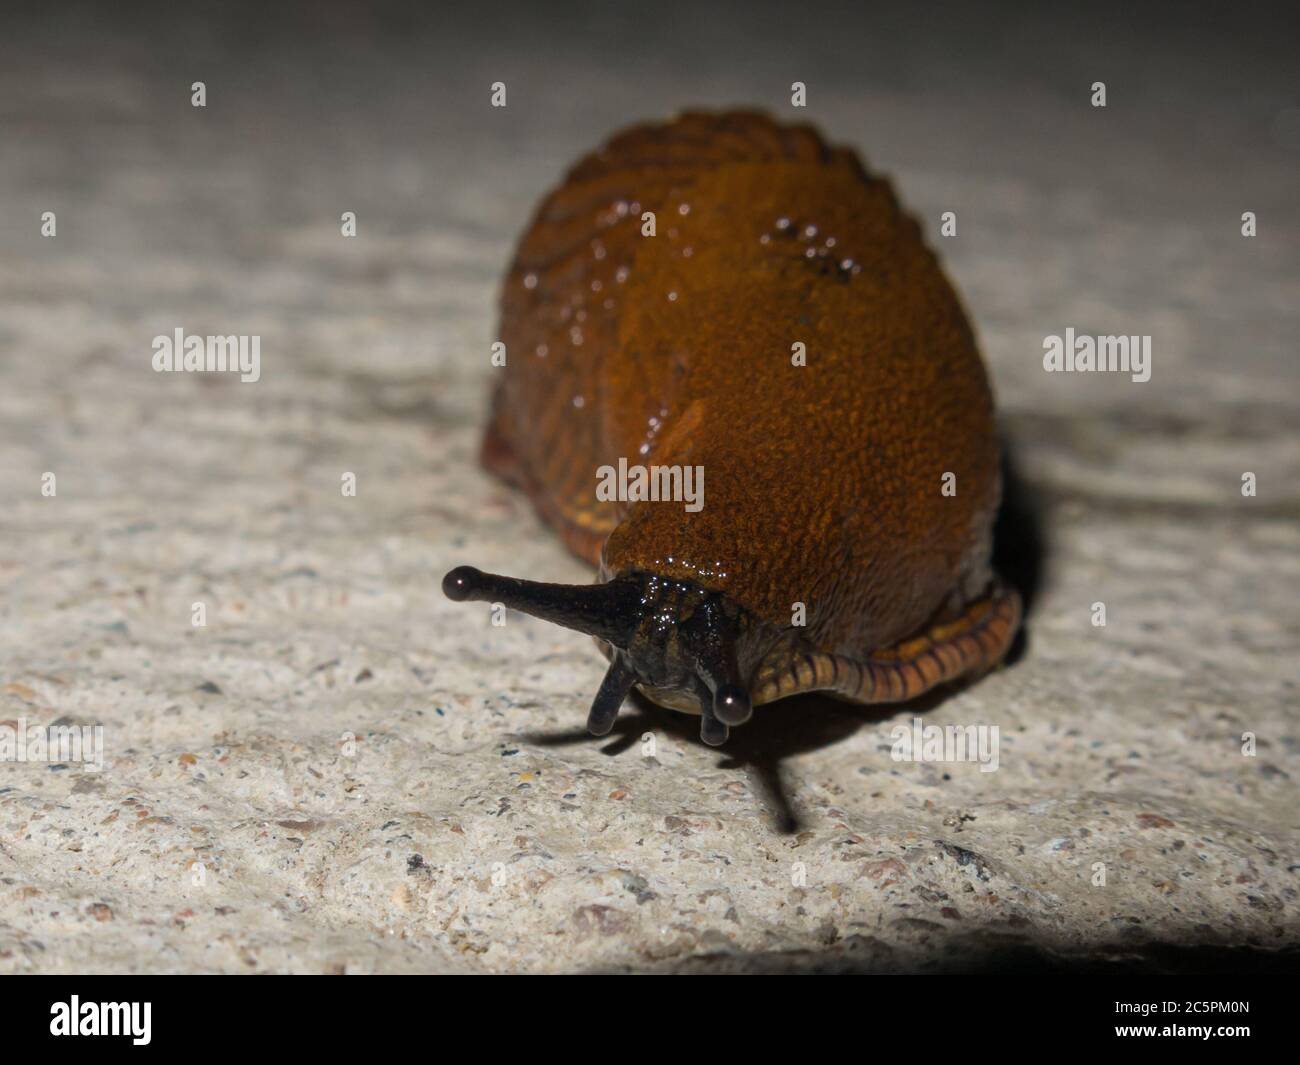 A snail or slug. Close-up picture. High quality photo Stock Photo